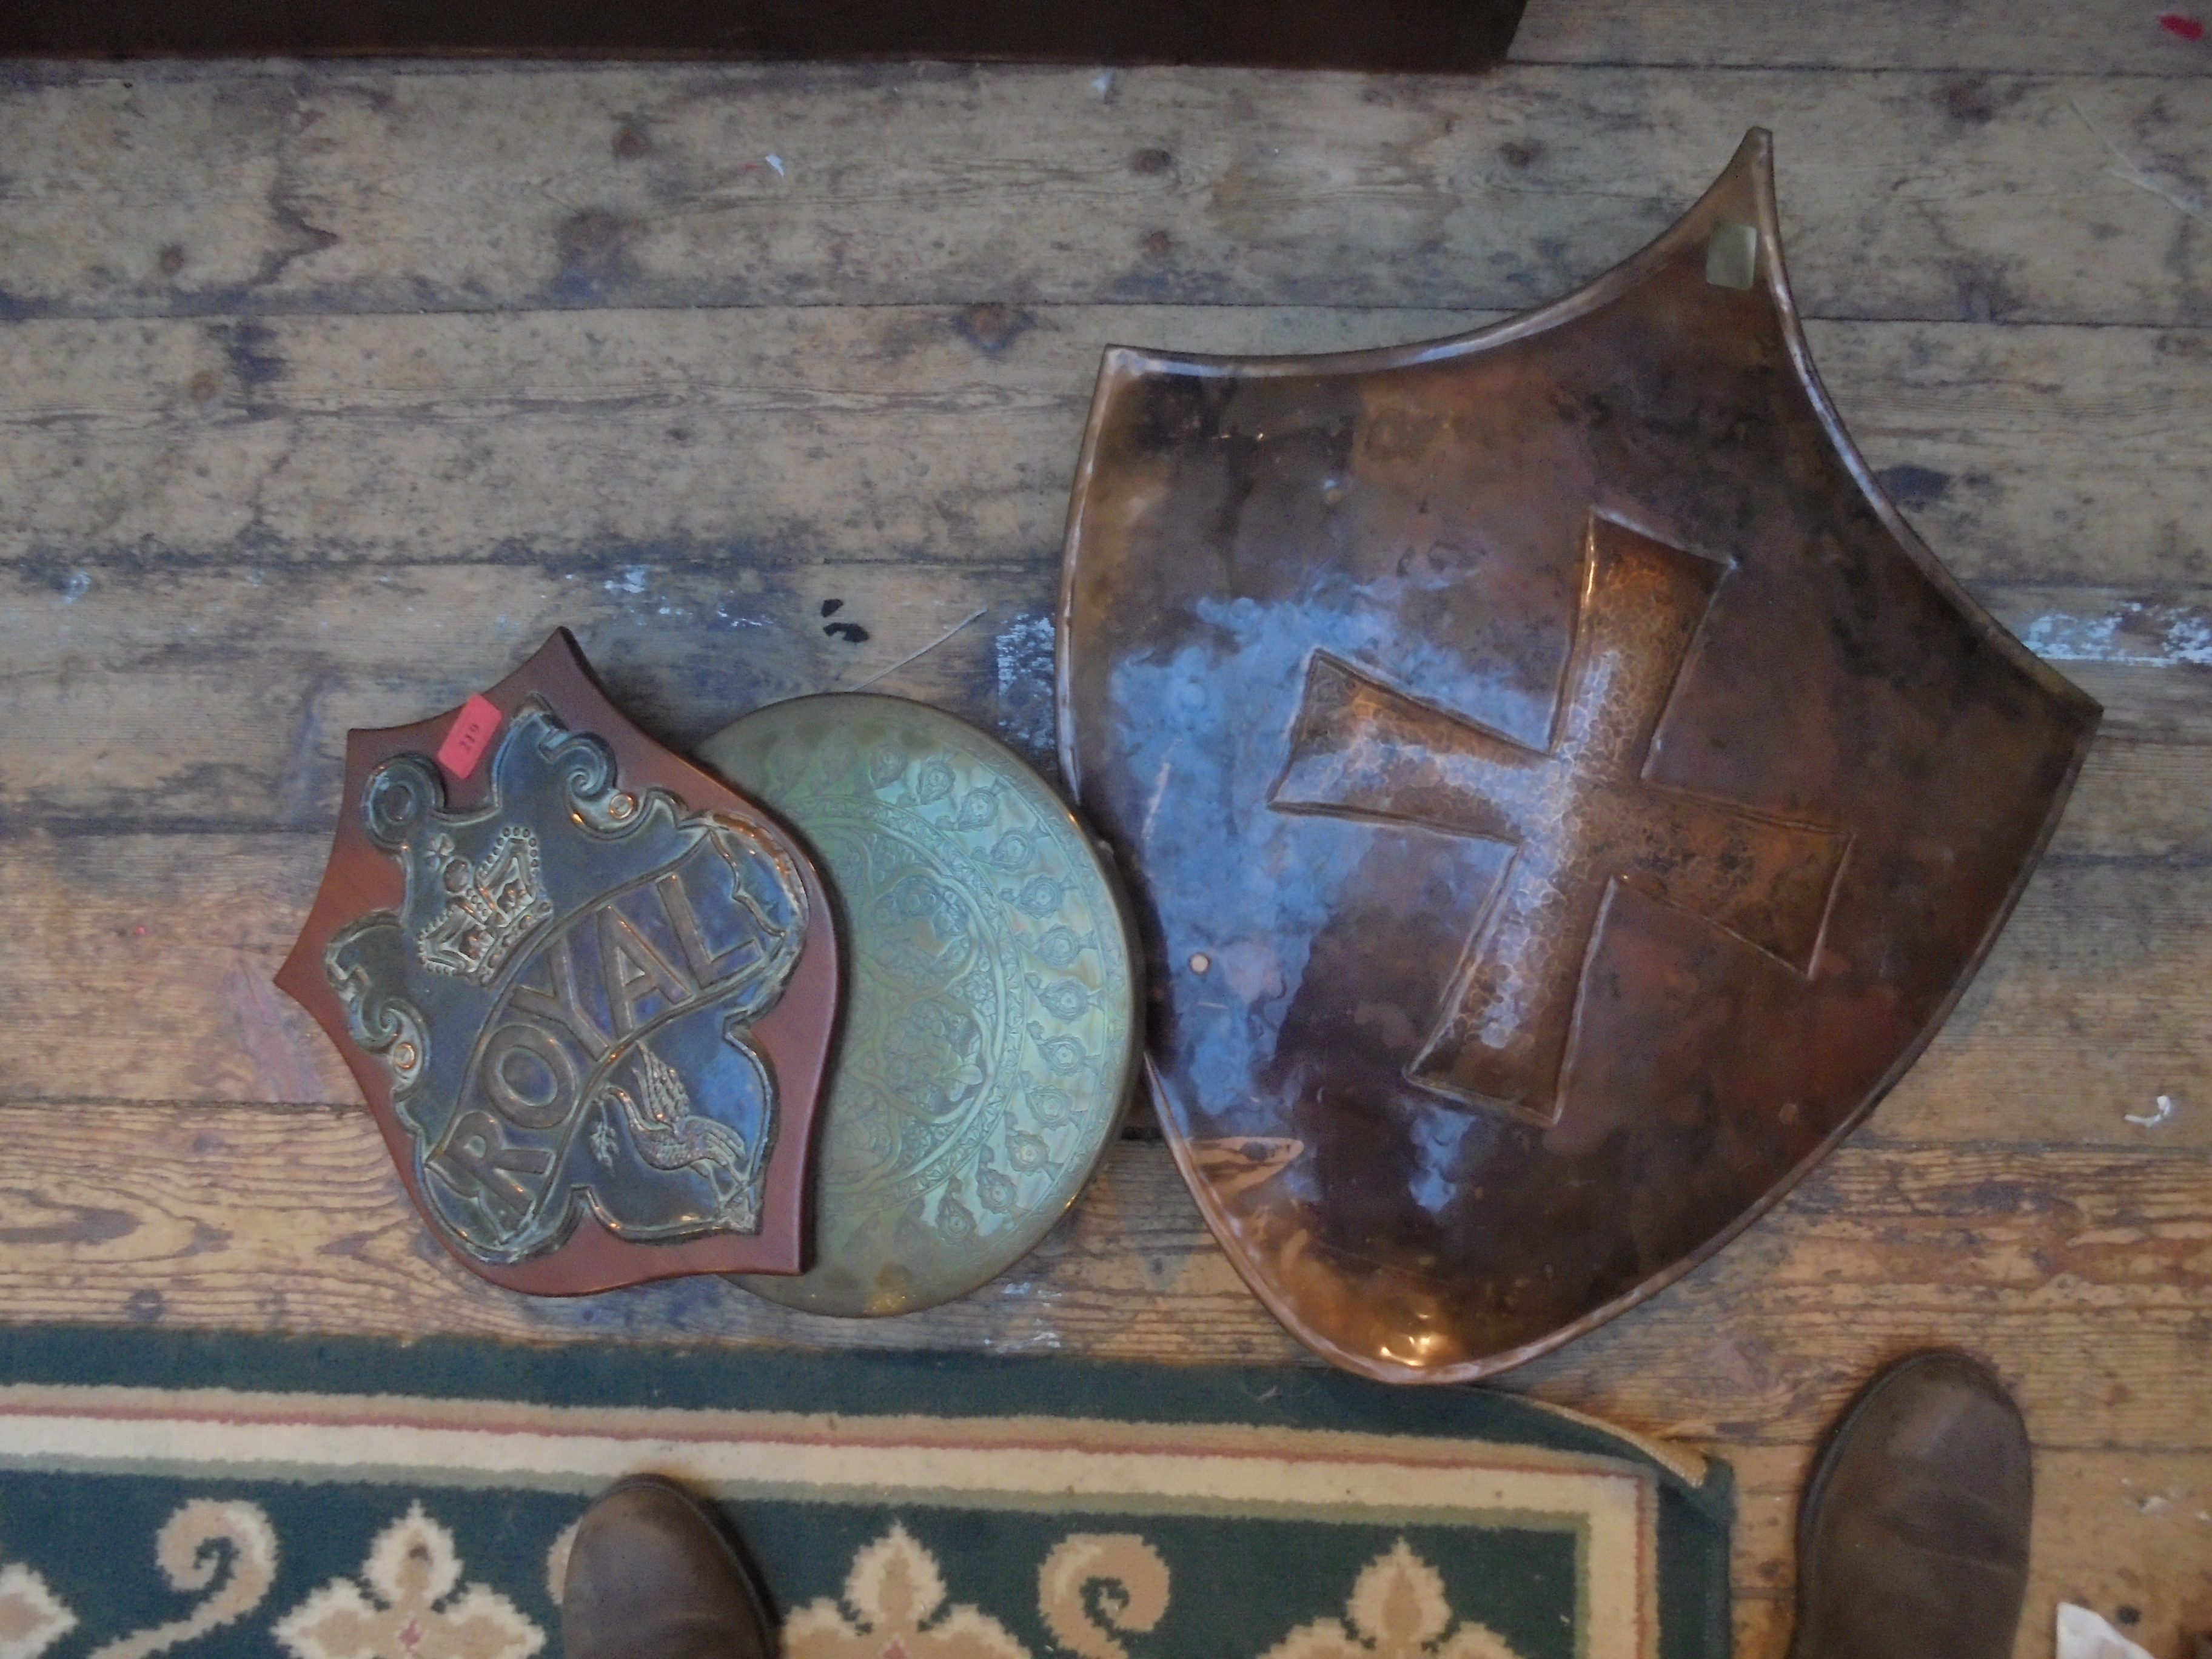 3 unusual items, one being a beaten copper shield,